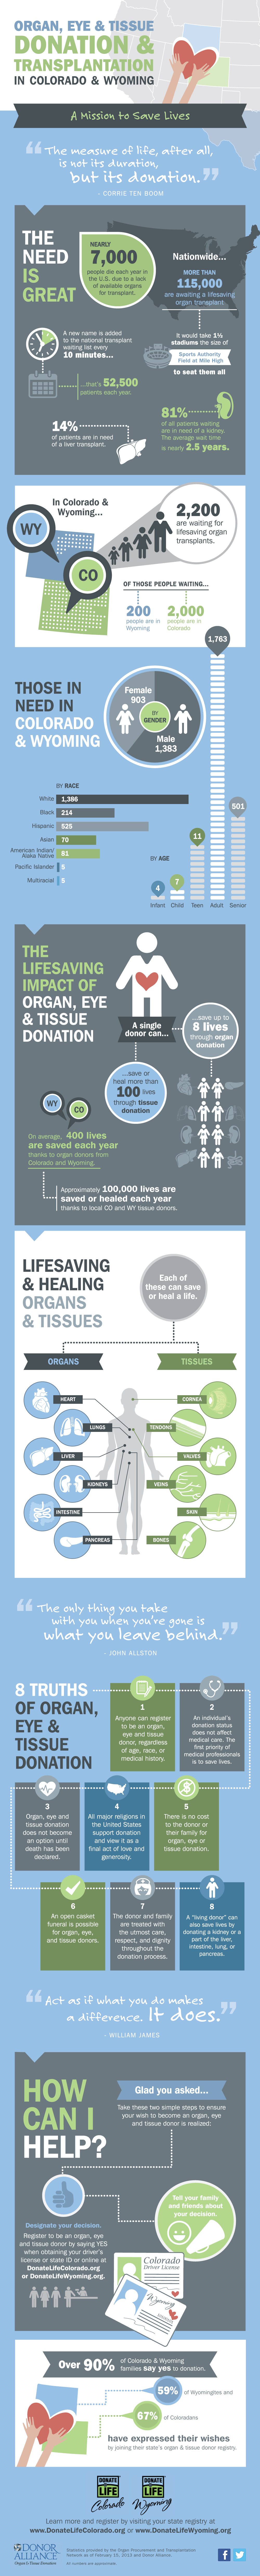 infographic be a donor